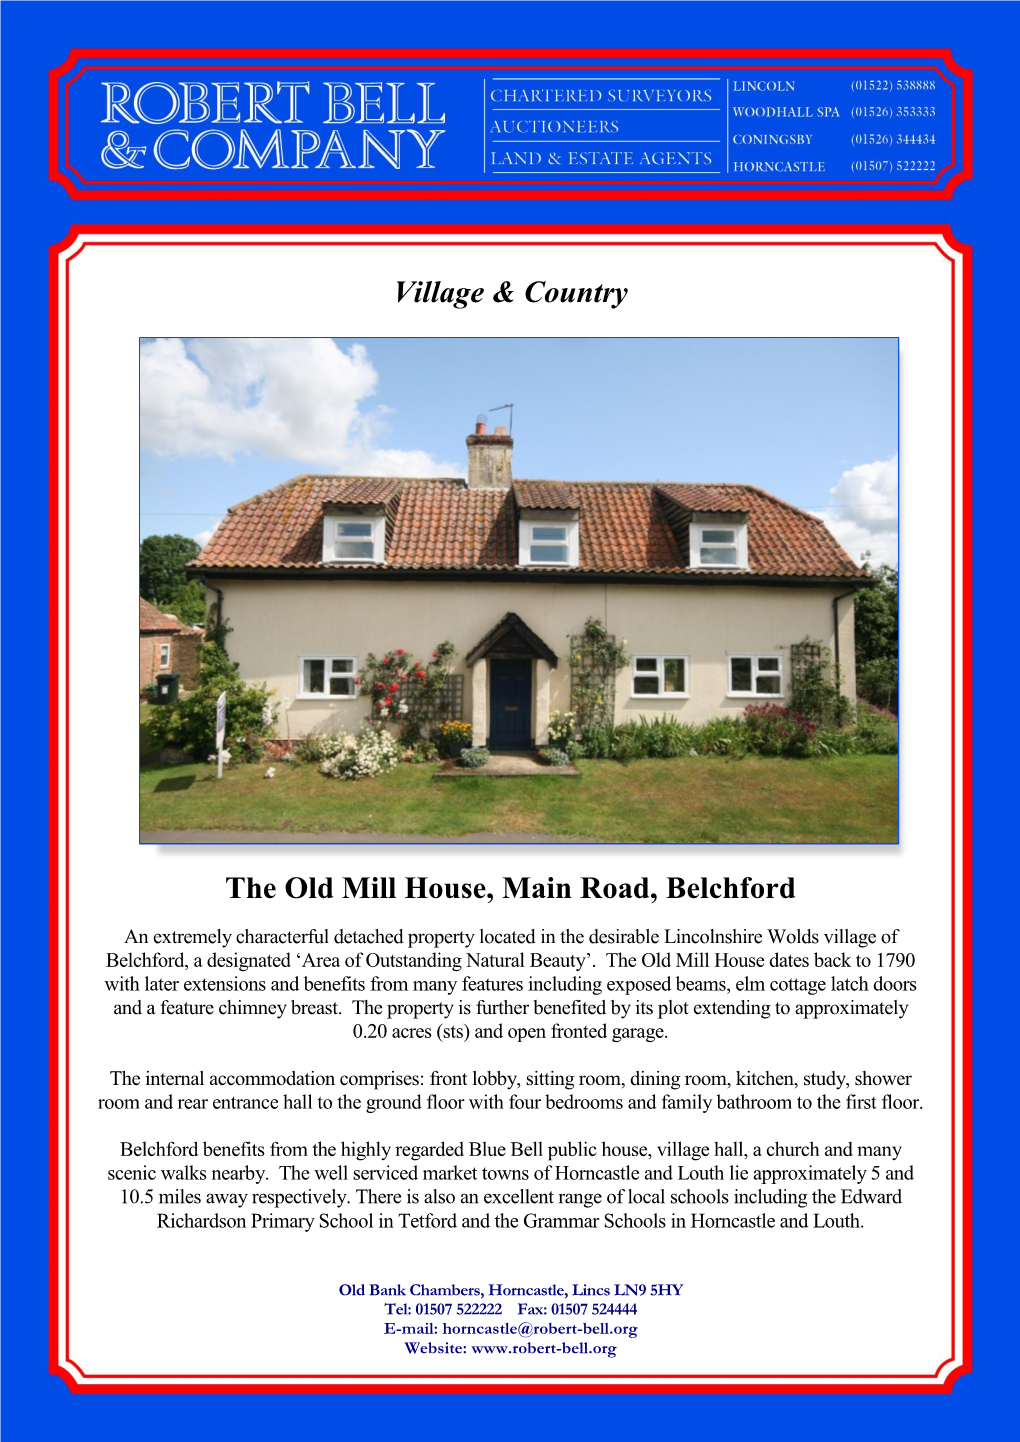 Village & Country the Old Mill House, Main Road, Belchford